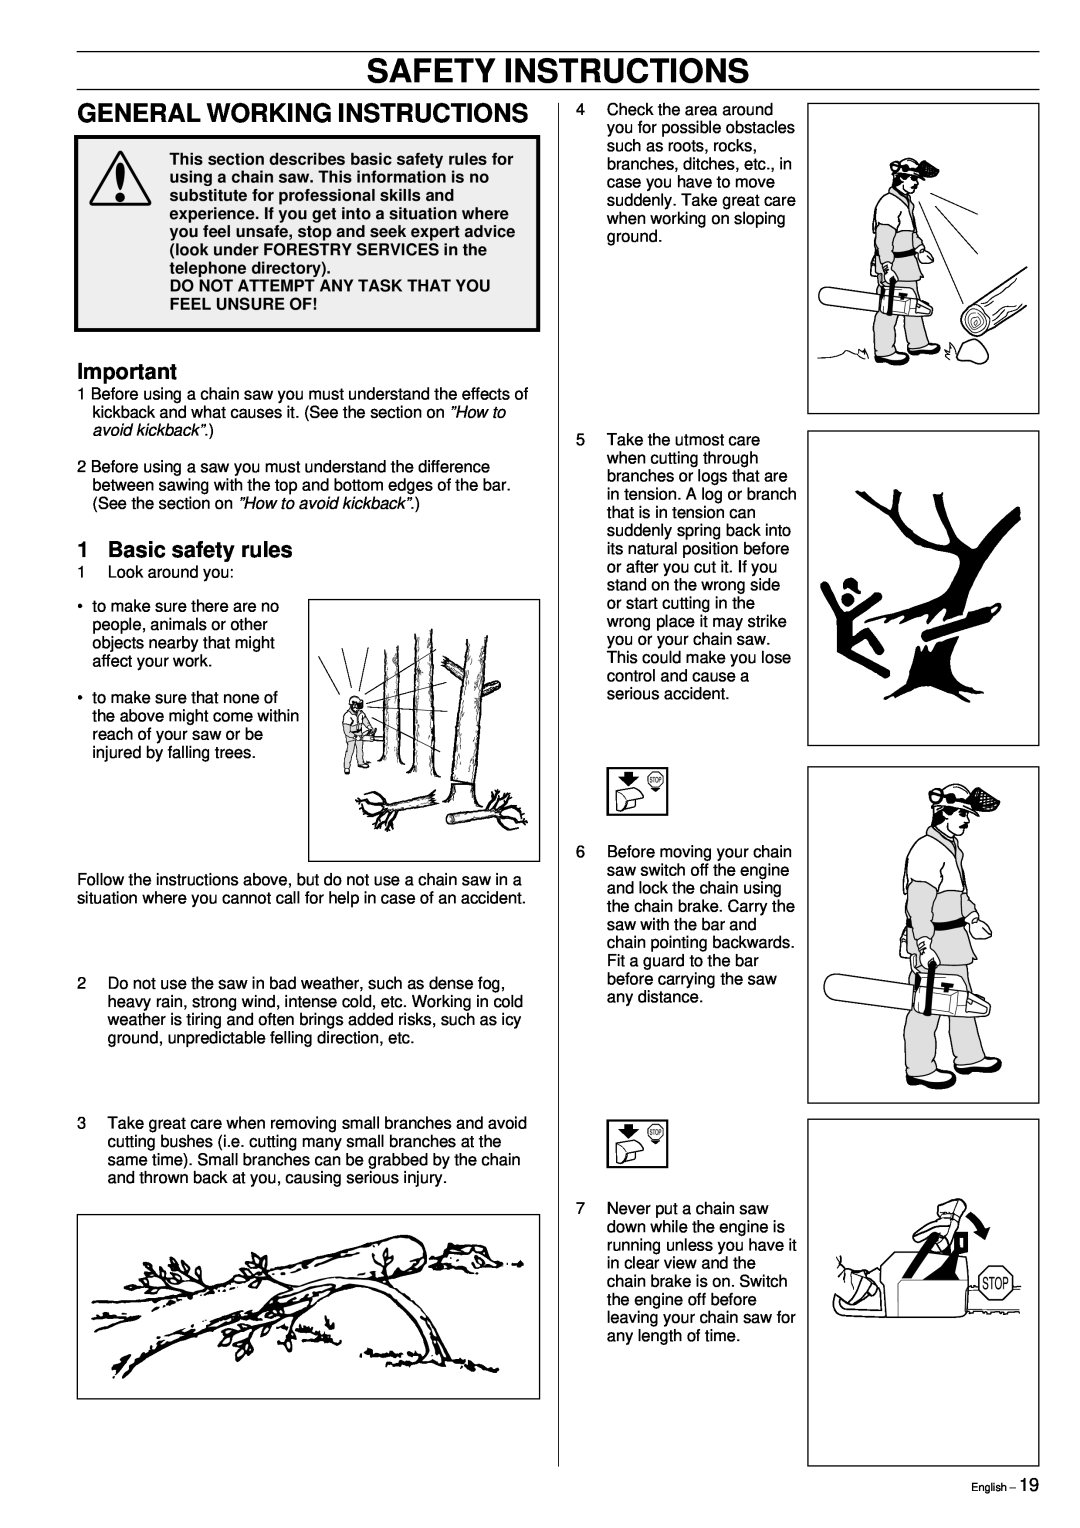 Jonsered 2159 manual General Working Instructions, Basic safety rules, Do Not Attempt Any Task That You Feel Unsure Of 